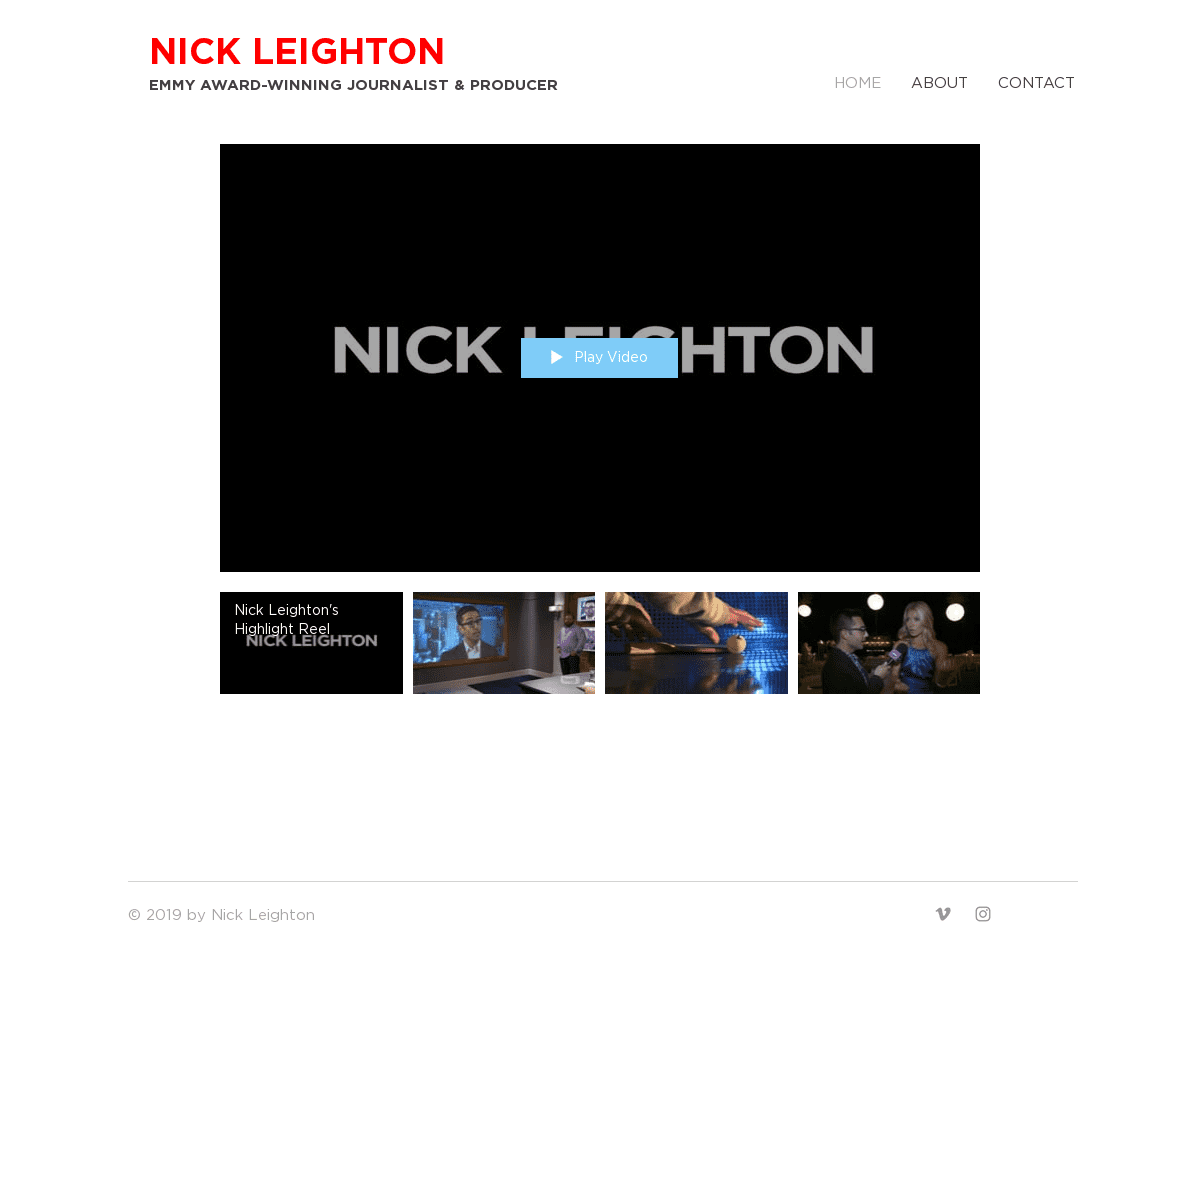 A complete backup of https://nickleighton.com